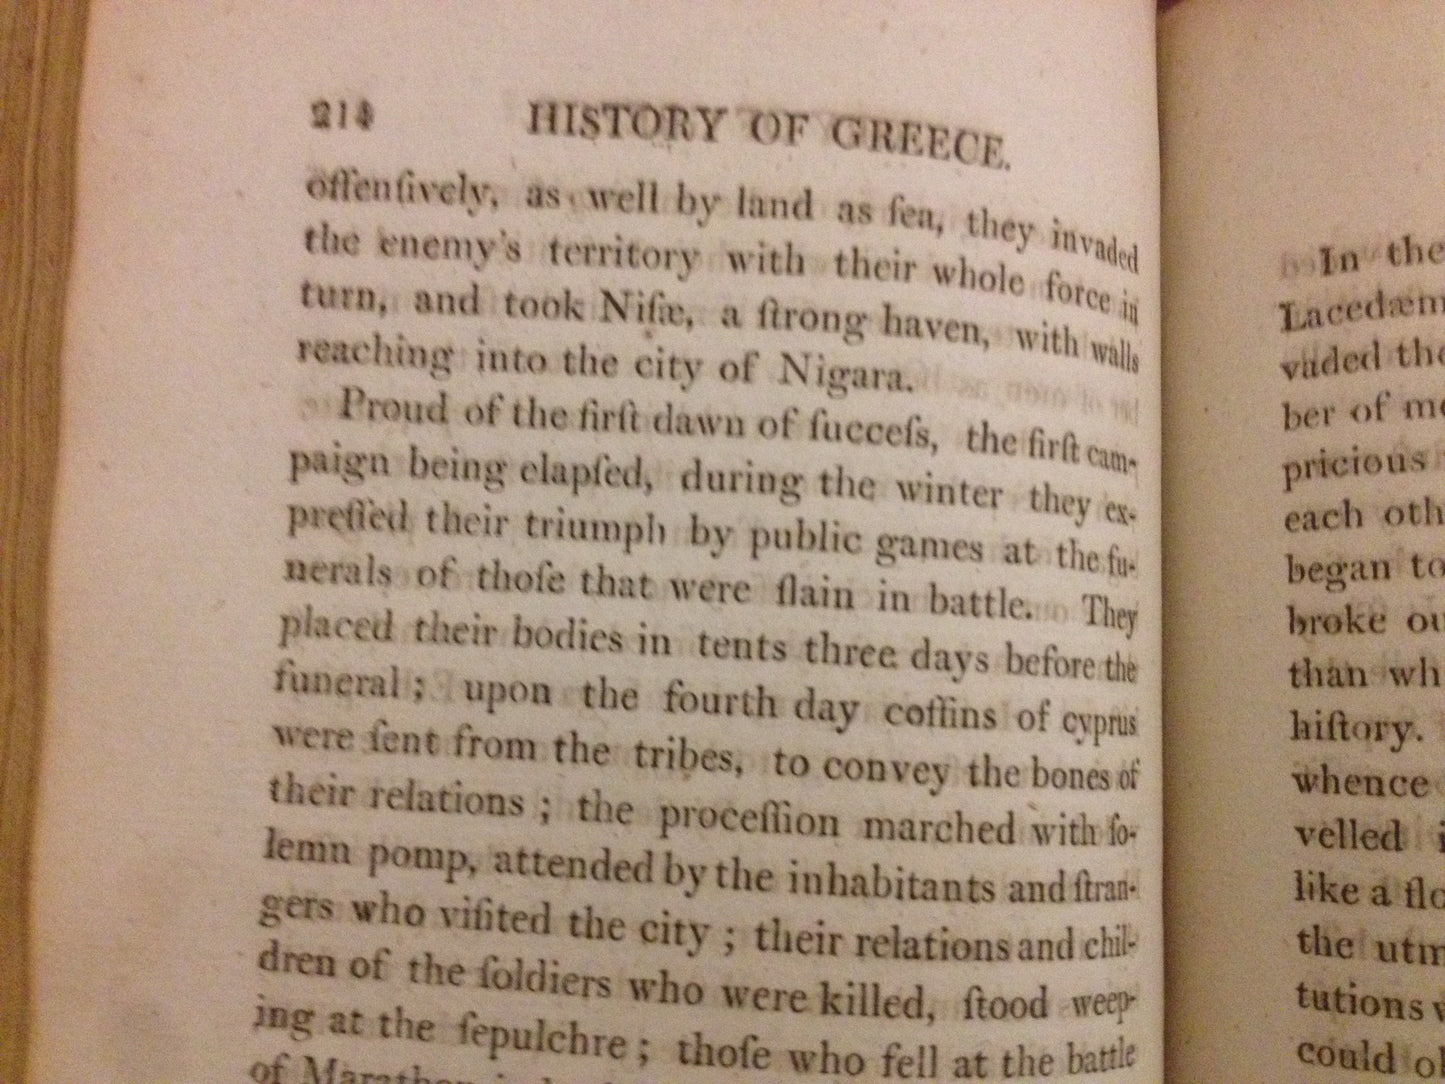 THE GRECIAN HISTORY, FROM THE EARLIEST STATE - TO THE DEATH OF ALEXANDER THE GREAT  BY: DR. GOLDSMITH [2 VOLUMES]